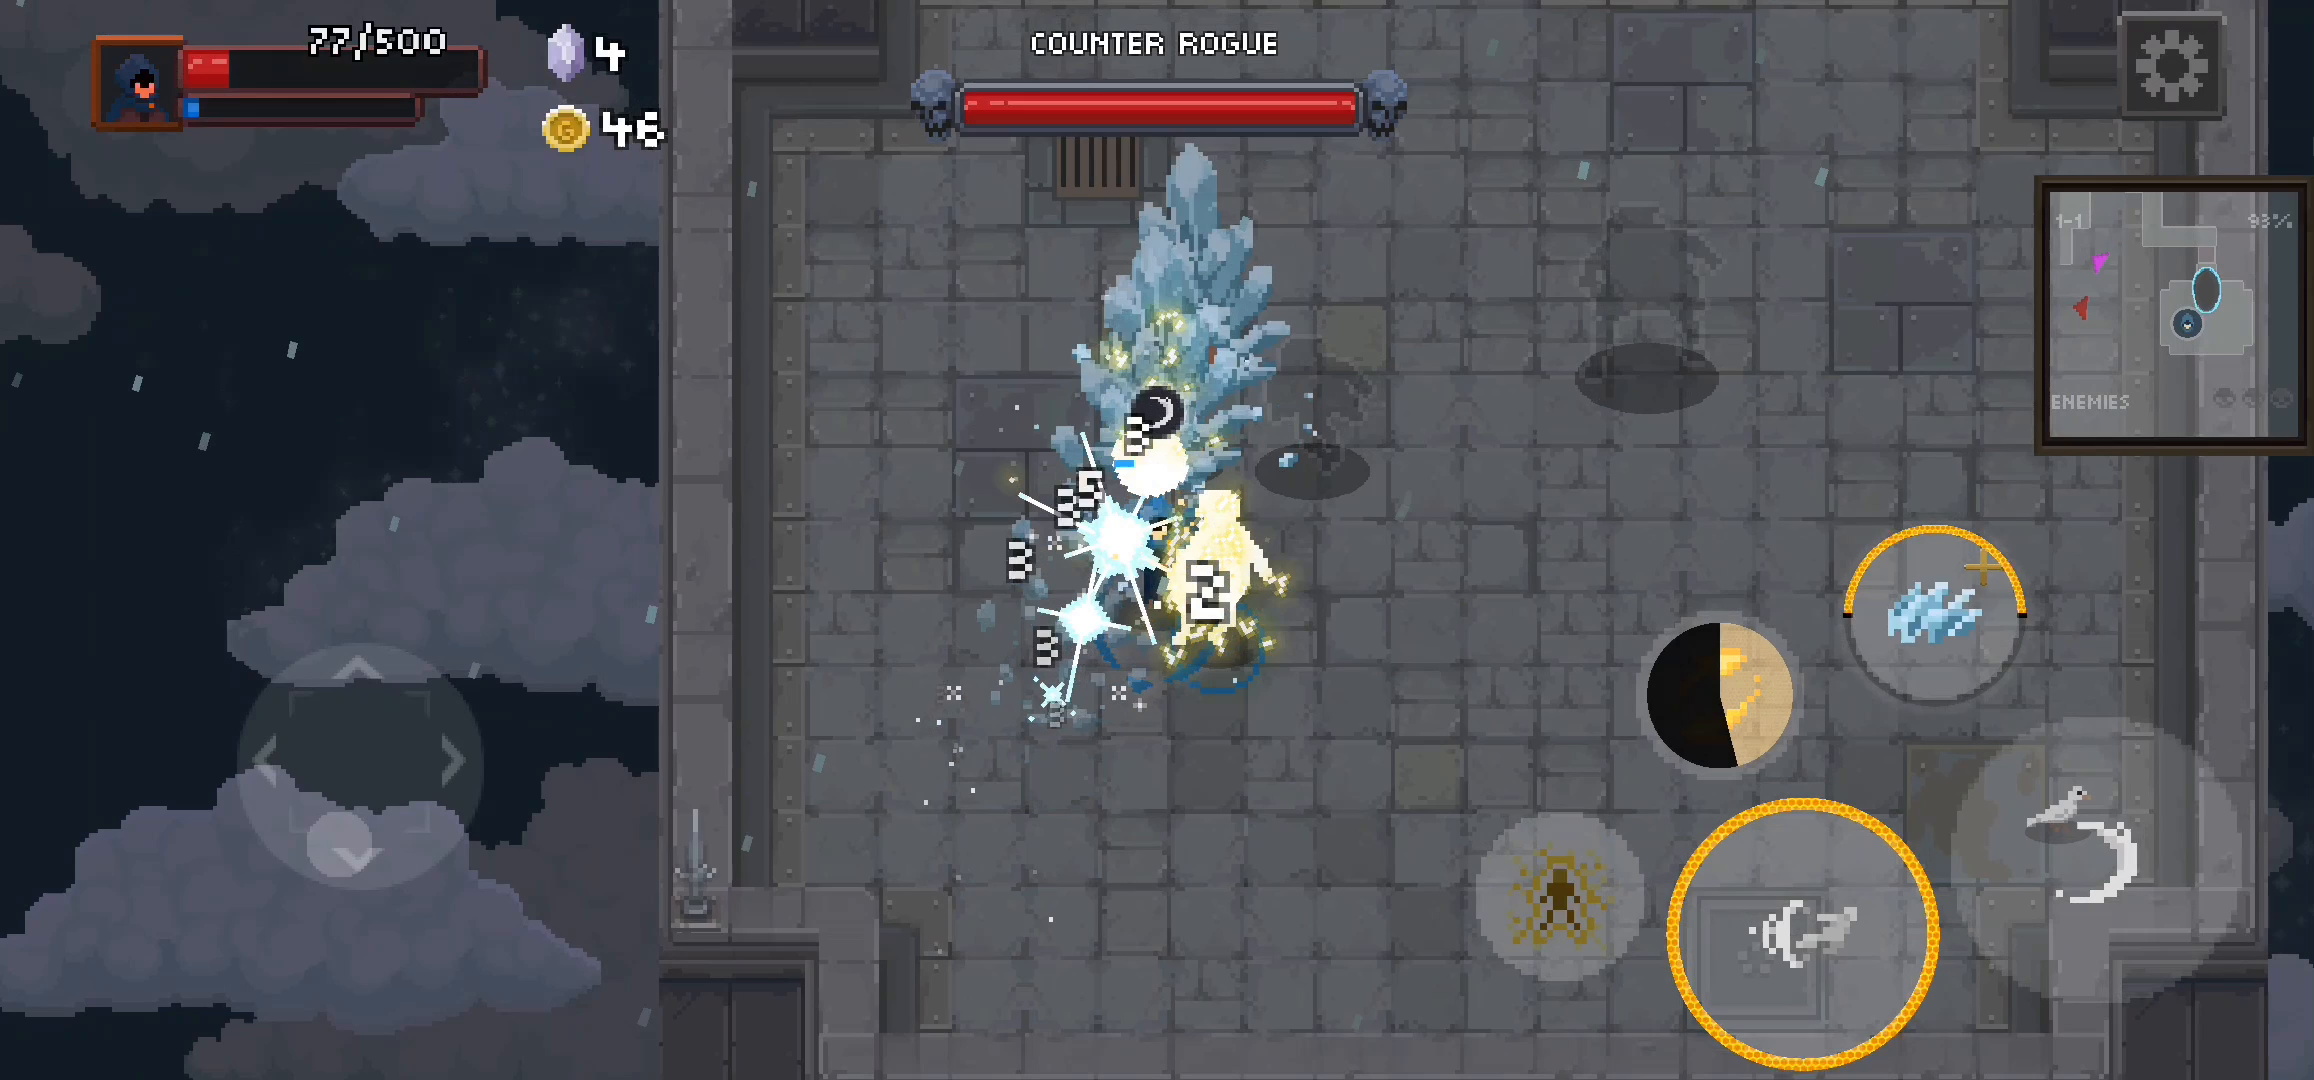 Wizard of Legend is the mobile dungeon crawler you can't put down